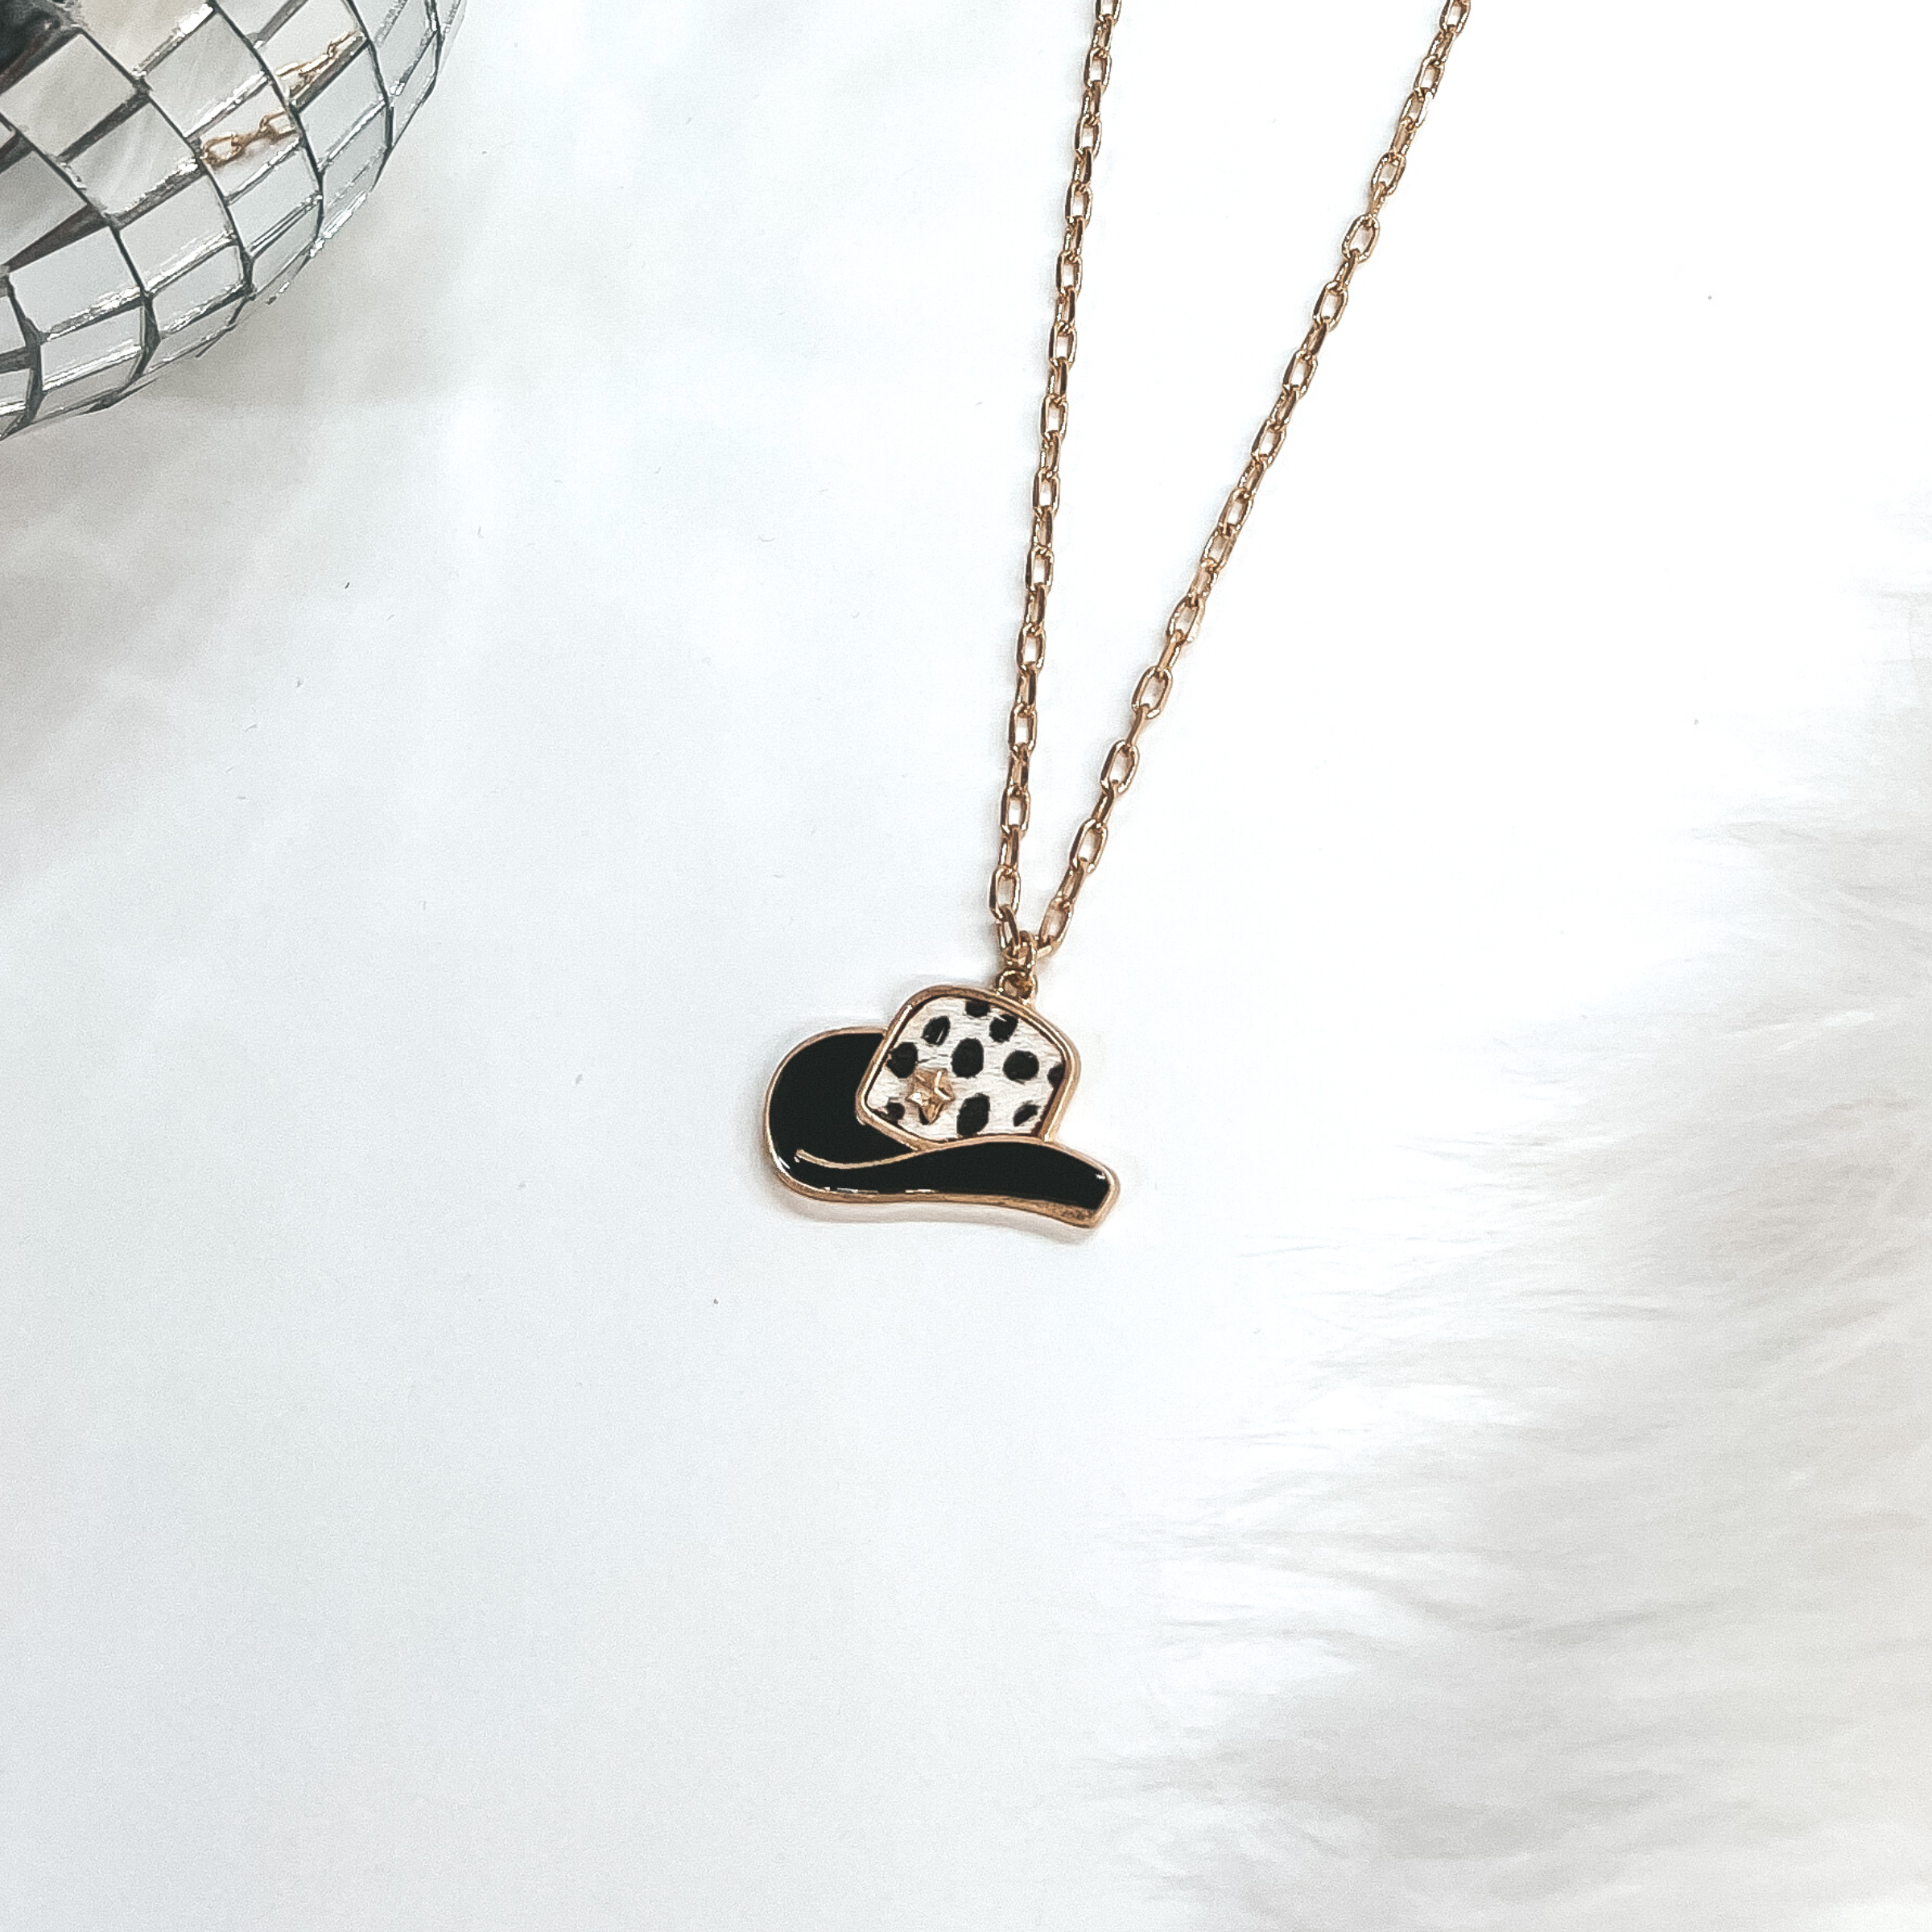 This is a gold chain necklace with a hat pendant in a gold setting. The hat pendant is black and has a dotted print with a gold star. This necklace is taken on laying on a white background with a white fur carpet in the side and two disco ball as decor.